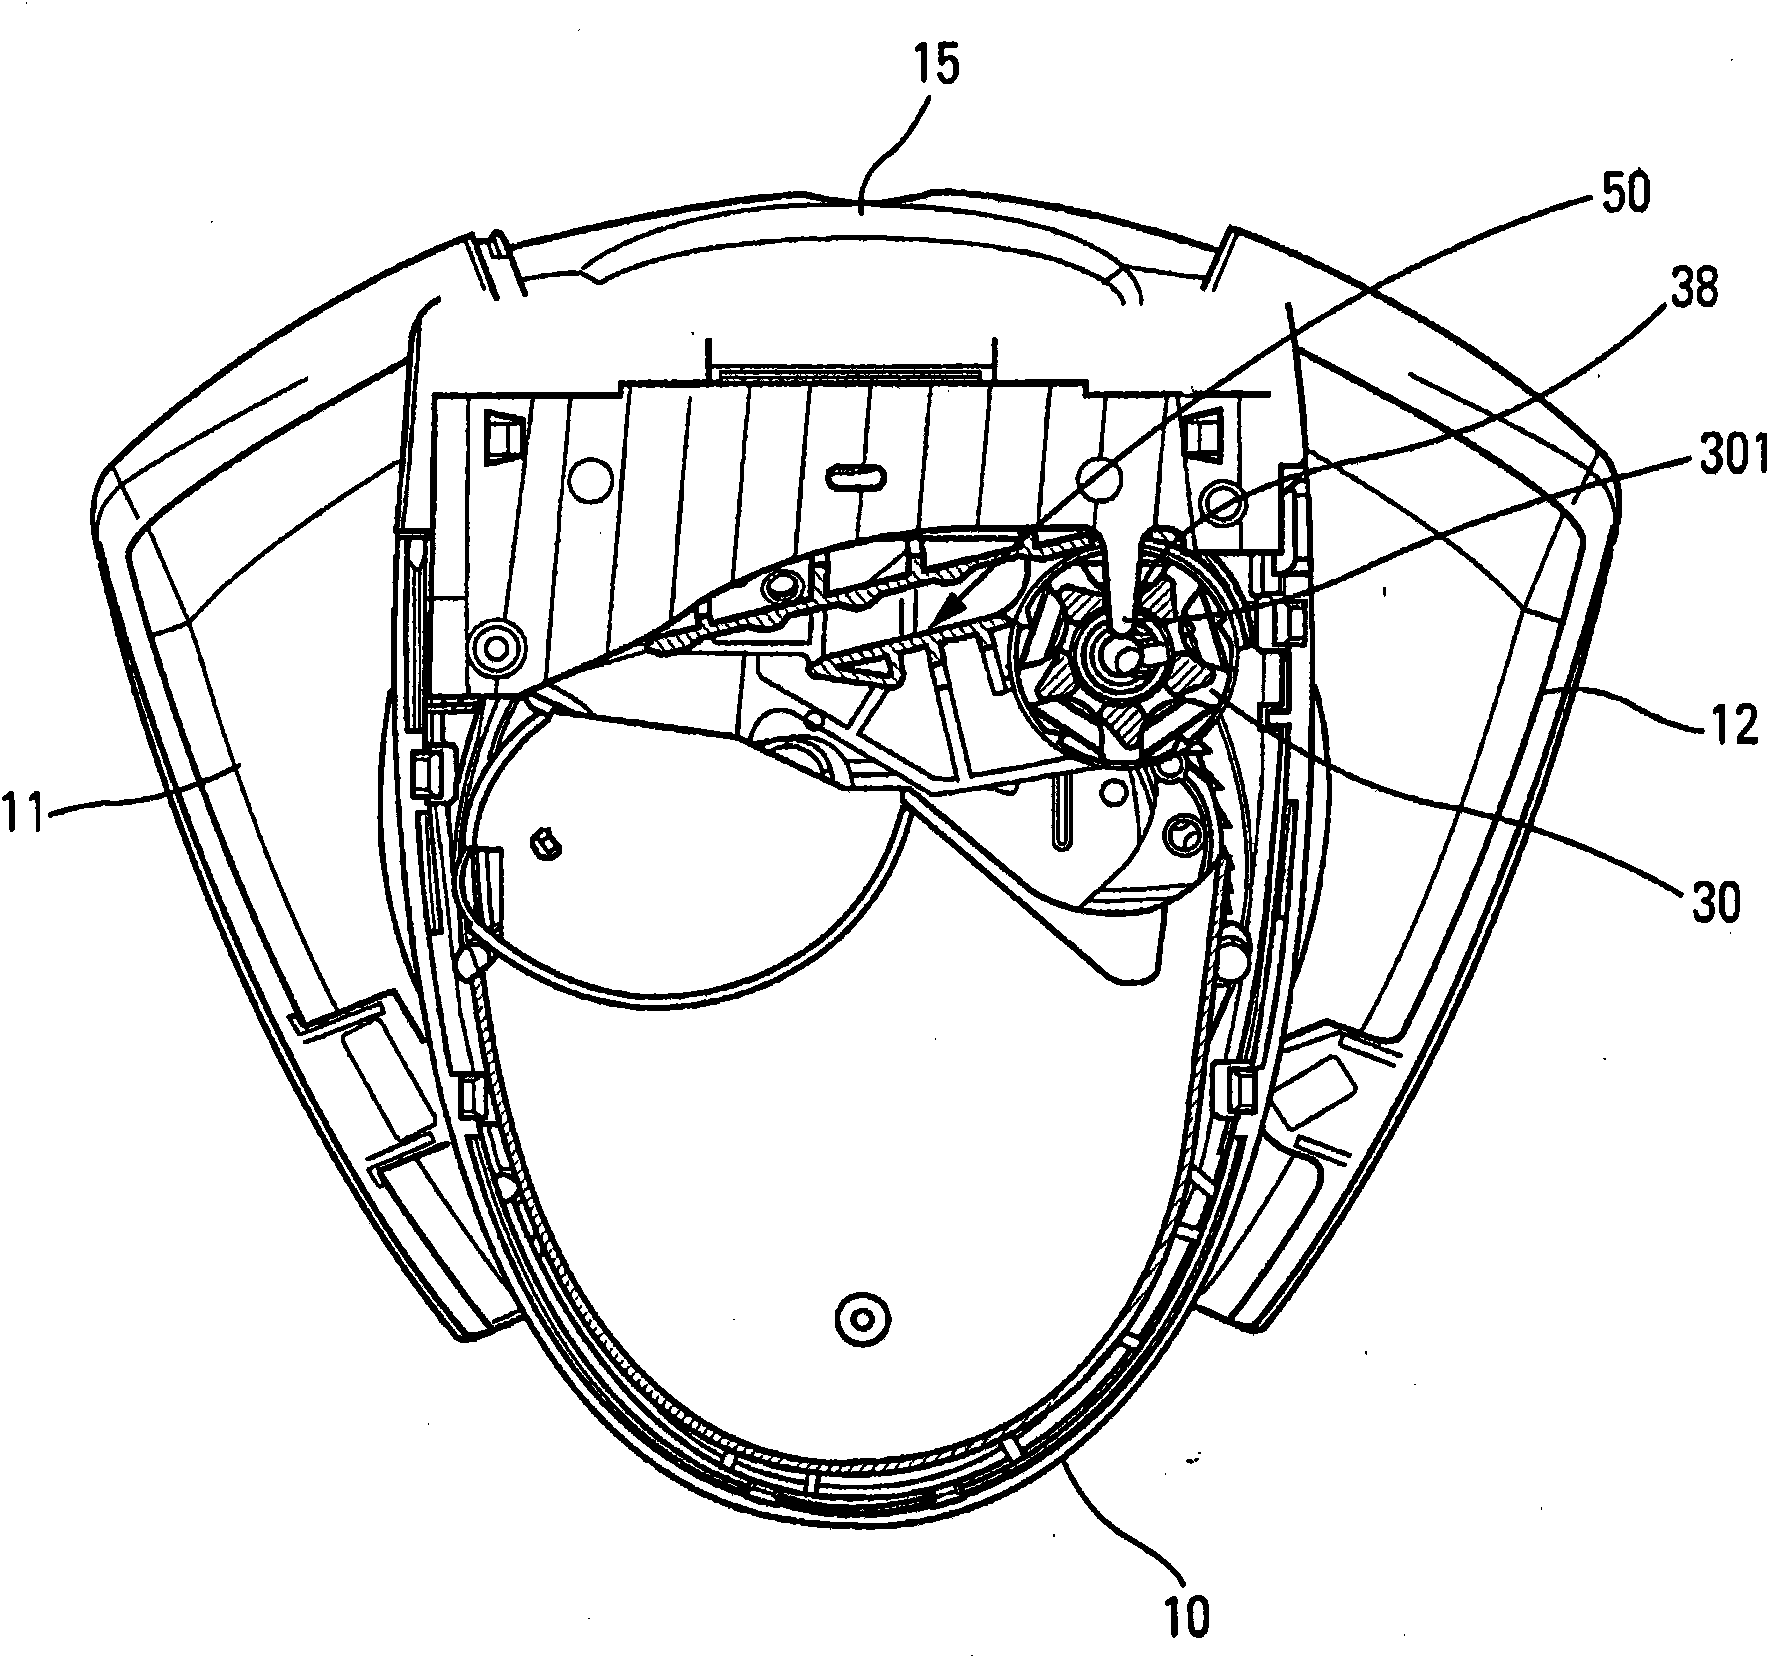 Device for distributing a fluid product